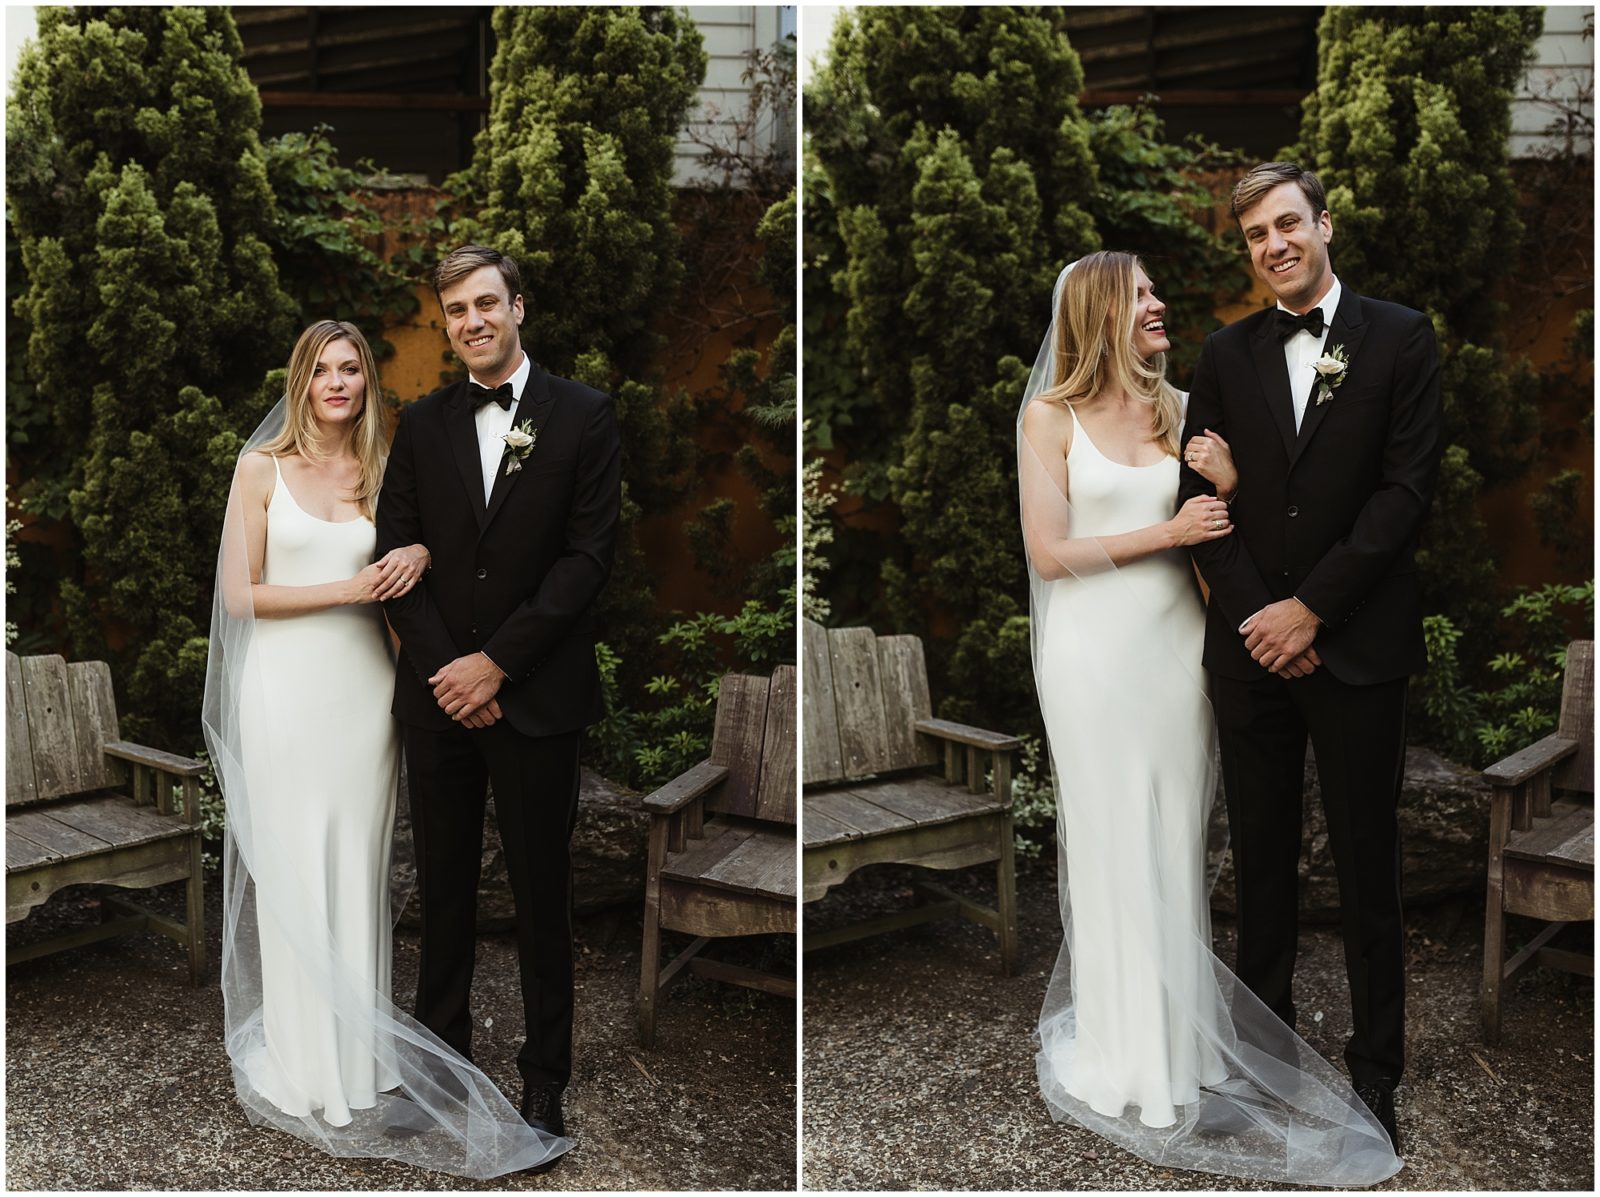 Modern and elegant bride and groom portraits in downtown Portland, OR